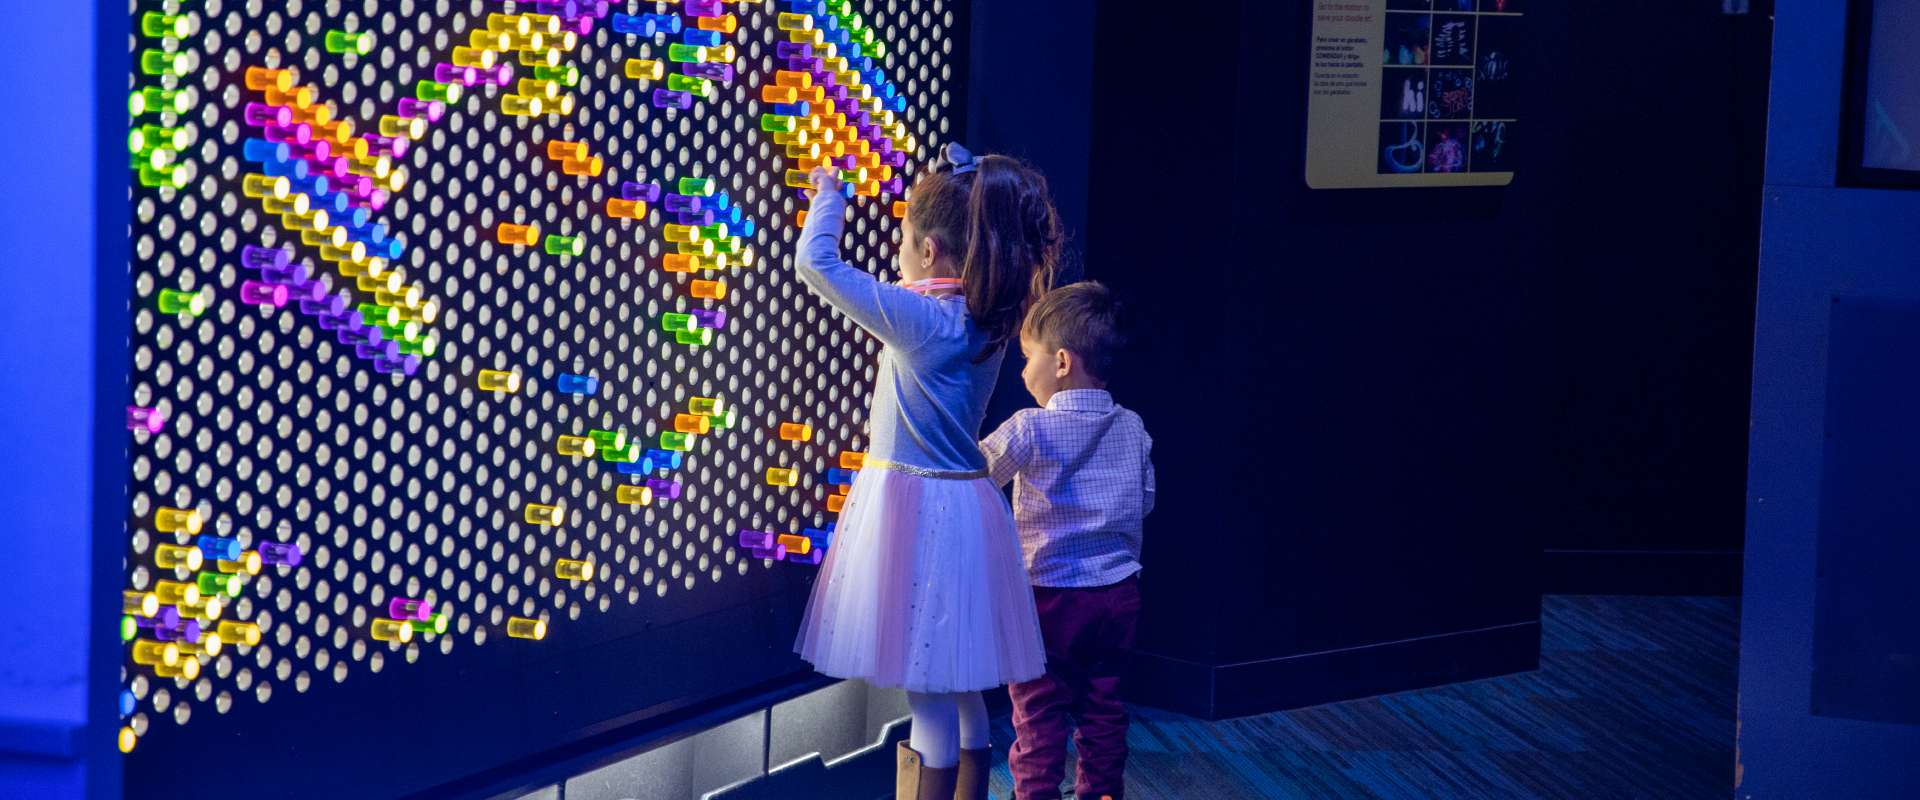 Children plug colored pegs into a Lite-Brite-style interactive mural in the <em>Dream Tomorrow Today</em> exhibit.